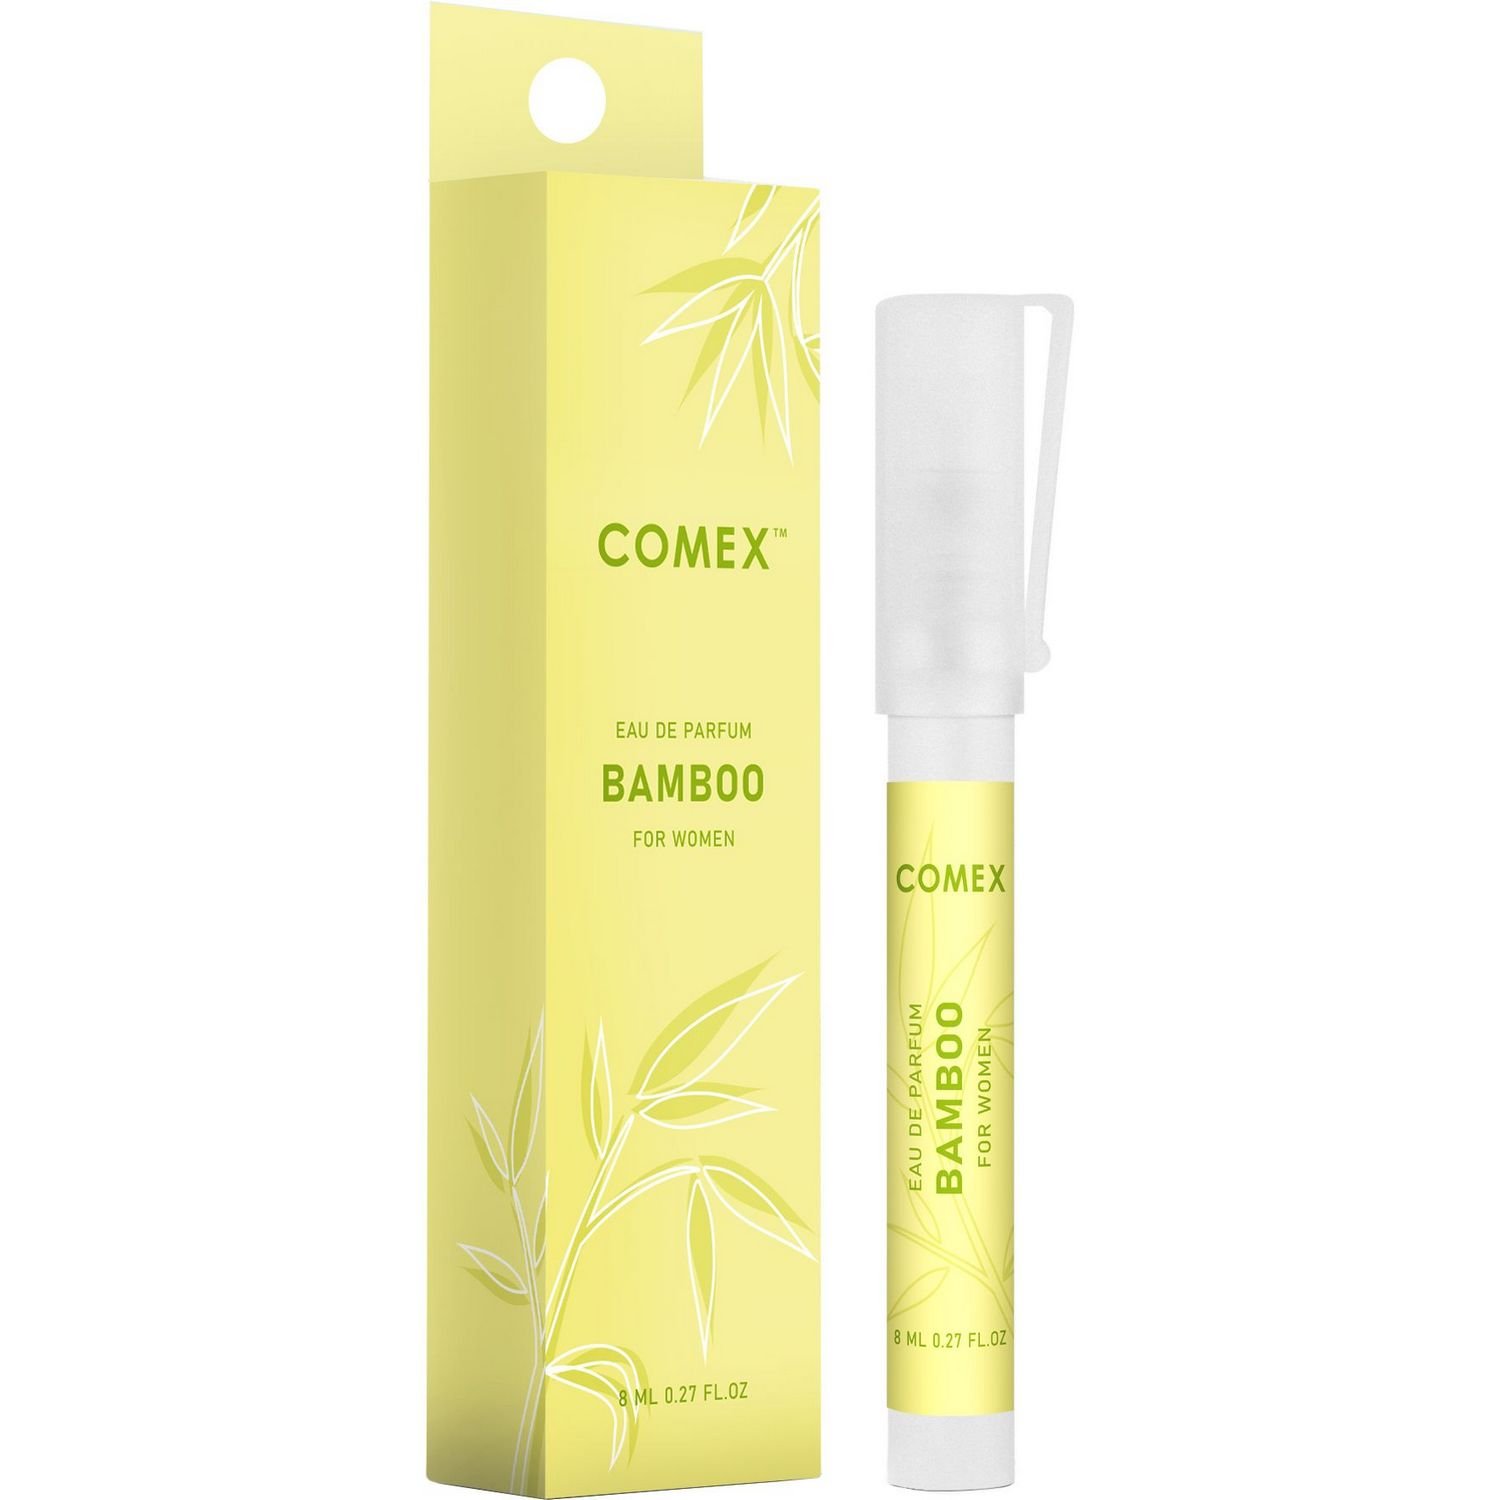 Парфумерна вода Comex For women Bamboo, 8 мл - фото 1